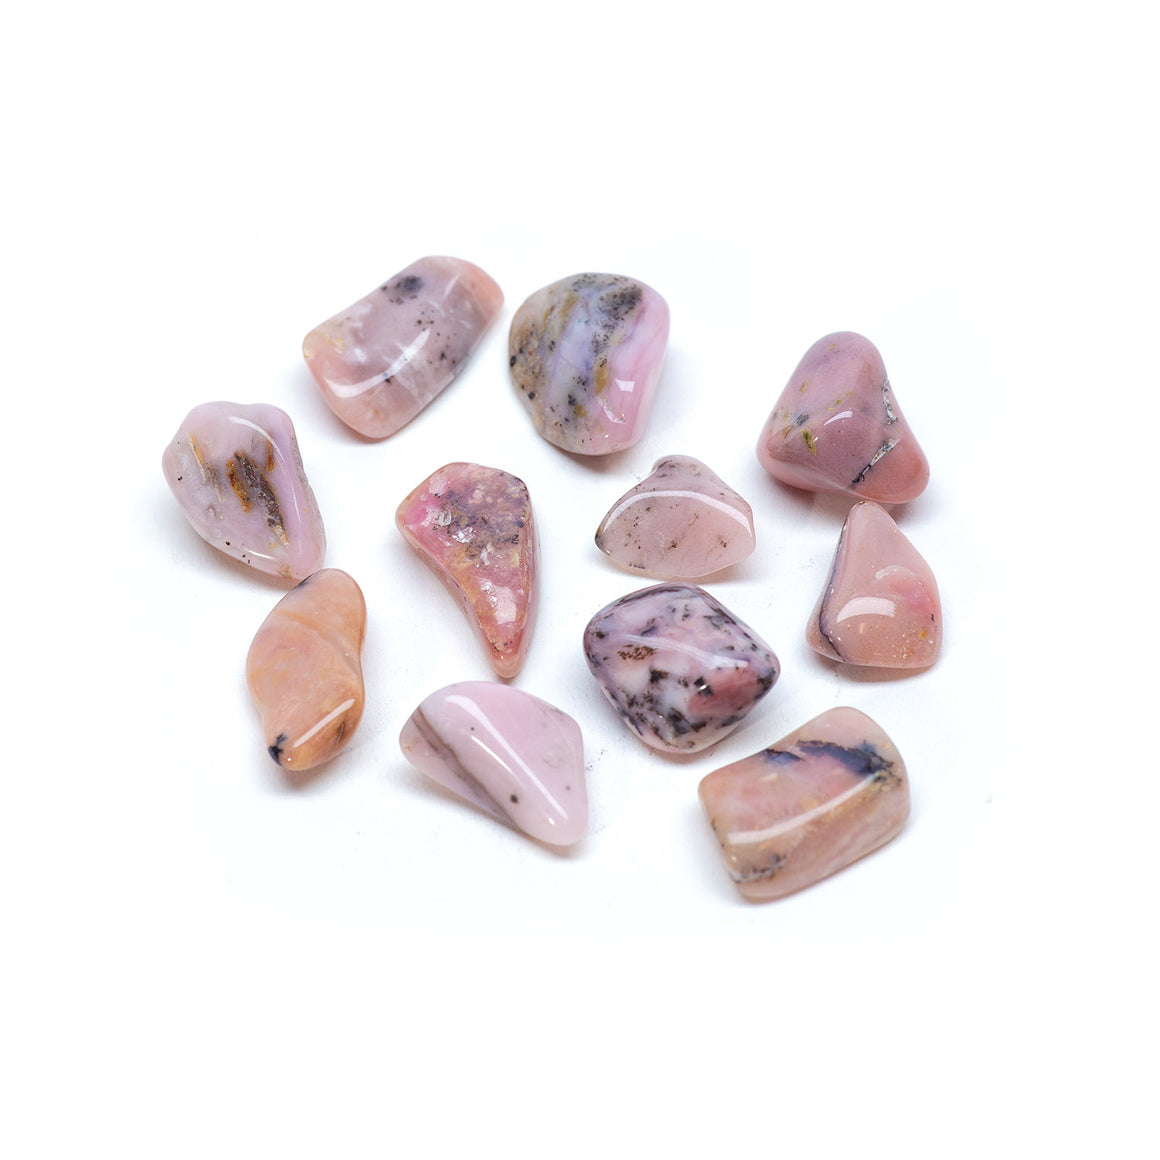 Peruvian Pink Opal Tumbled, two pieces